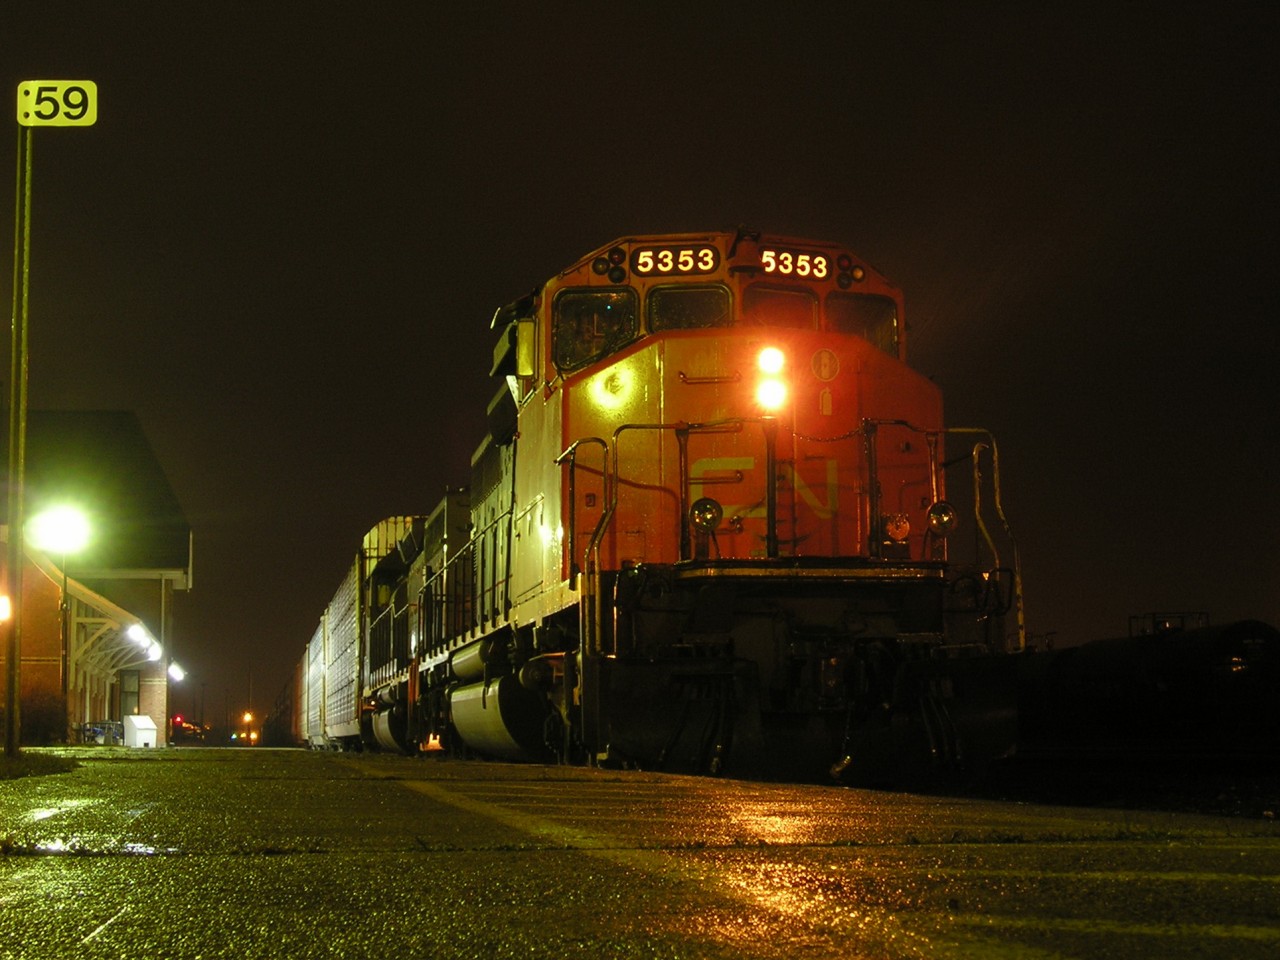 CN 5353 idles in front of the VIA Rail Station in Sarnia, Ontario, under misty skies.